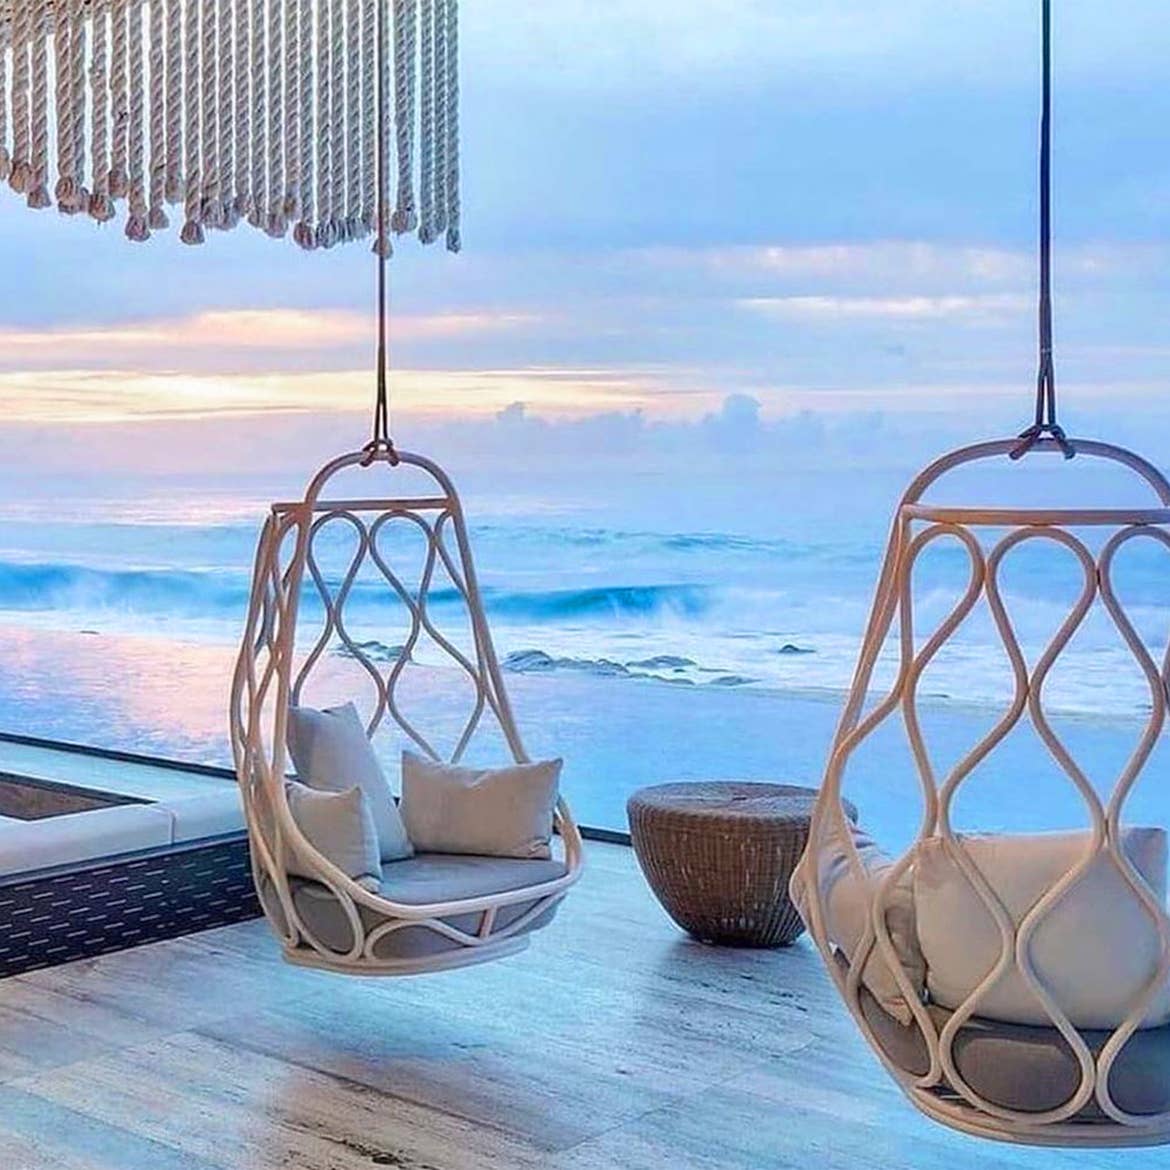 Two hanging, swing chairs overlook the ocean on a tiled patio outdoors.